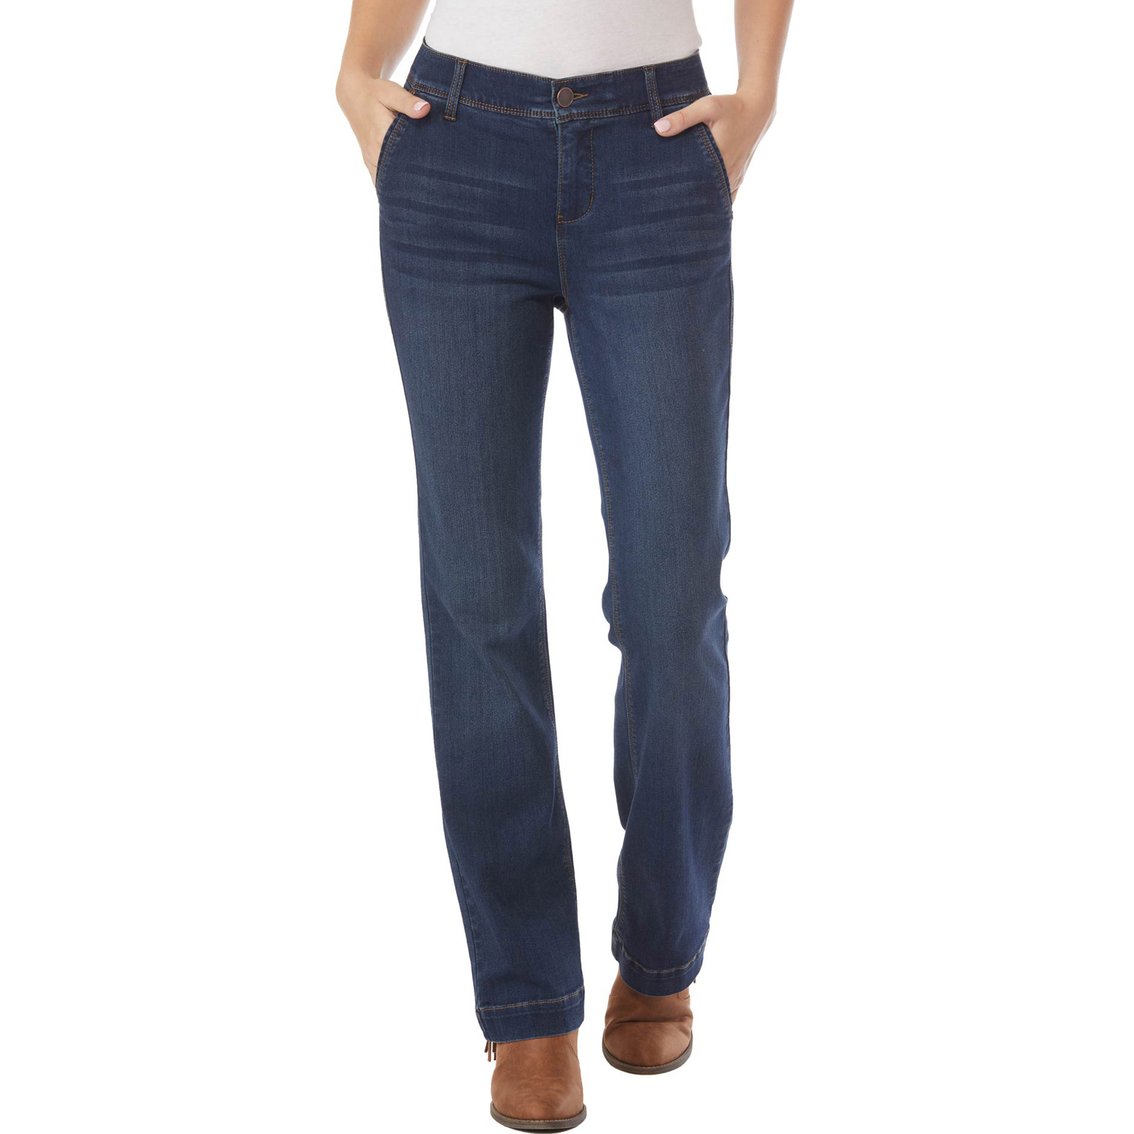 Jw Goddess Trouser Jeans | Jeans | Clothing & Accessories | Shop The ...